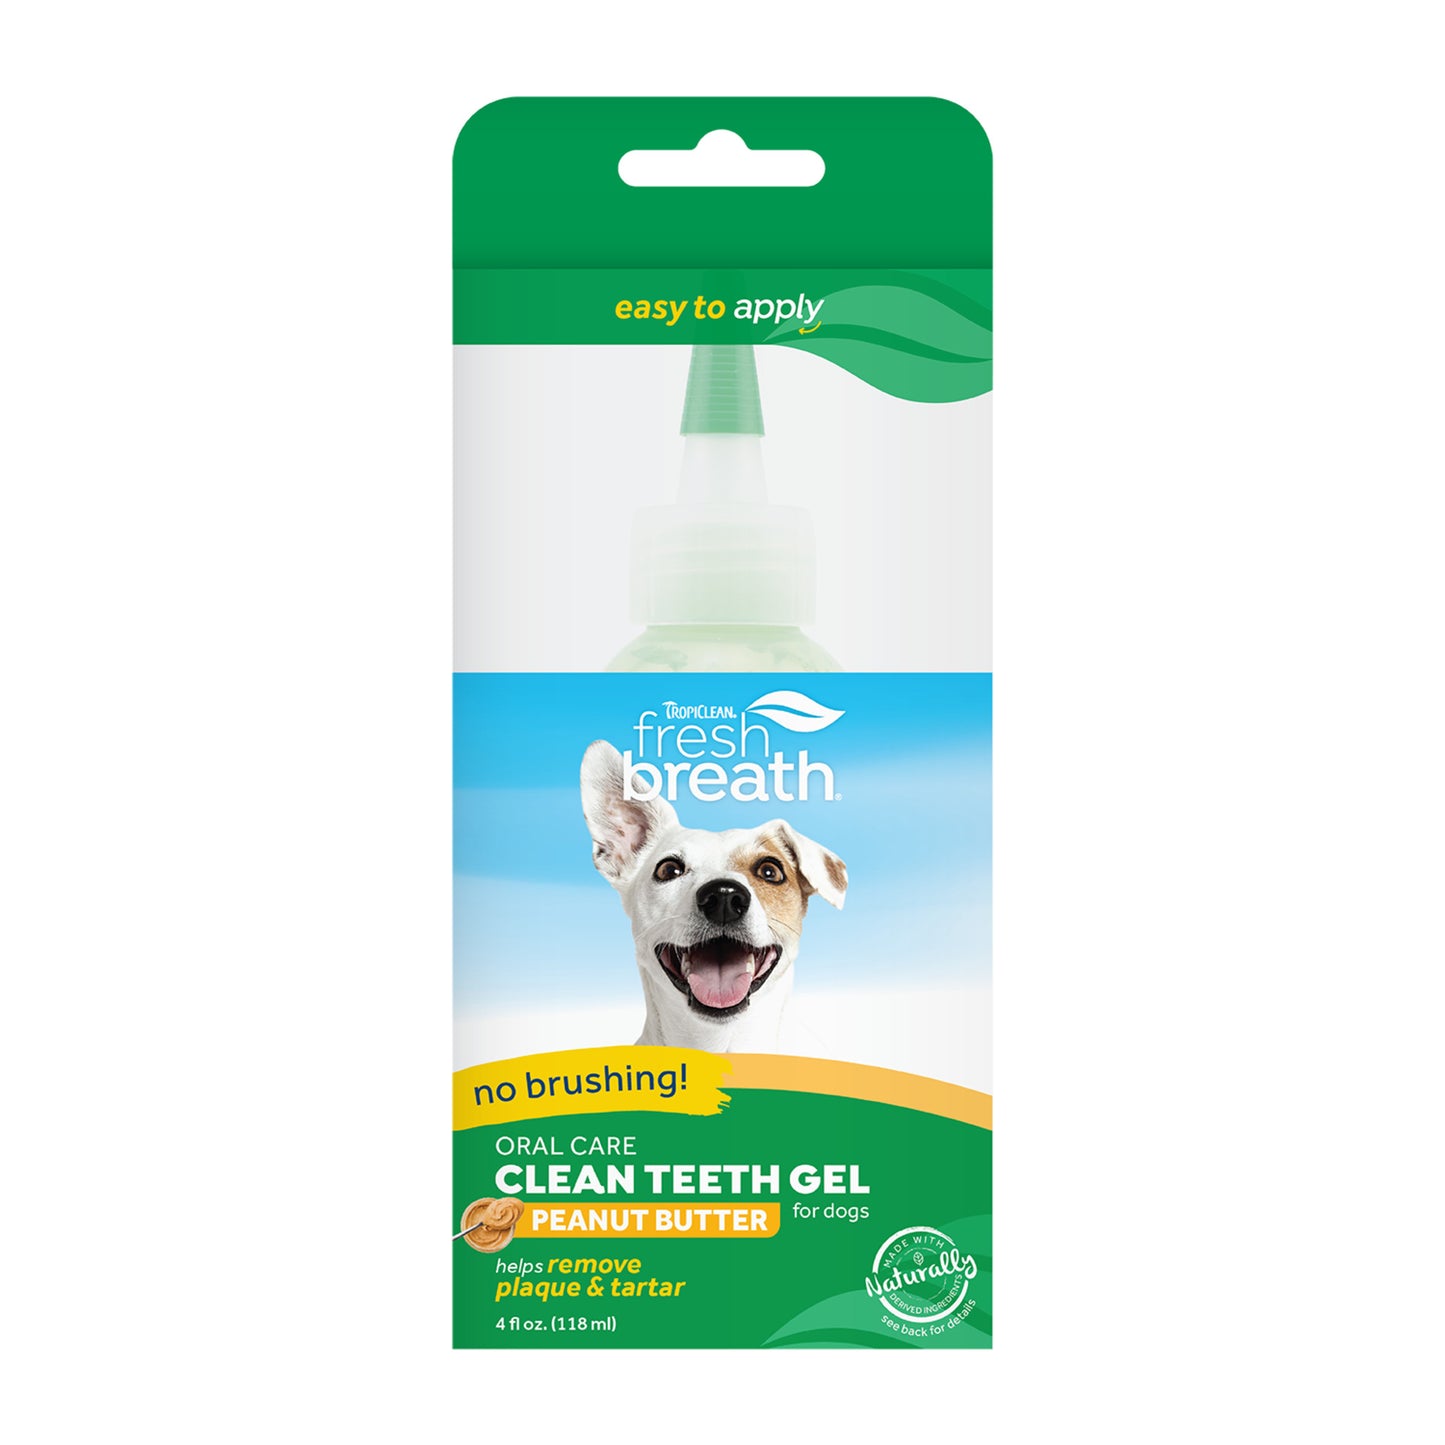 TROPICLEAN FRESH BREATH ORAL CARE GEL FOR DOGS – PEANUT BUTTER FLAVOR